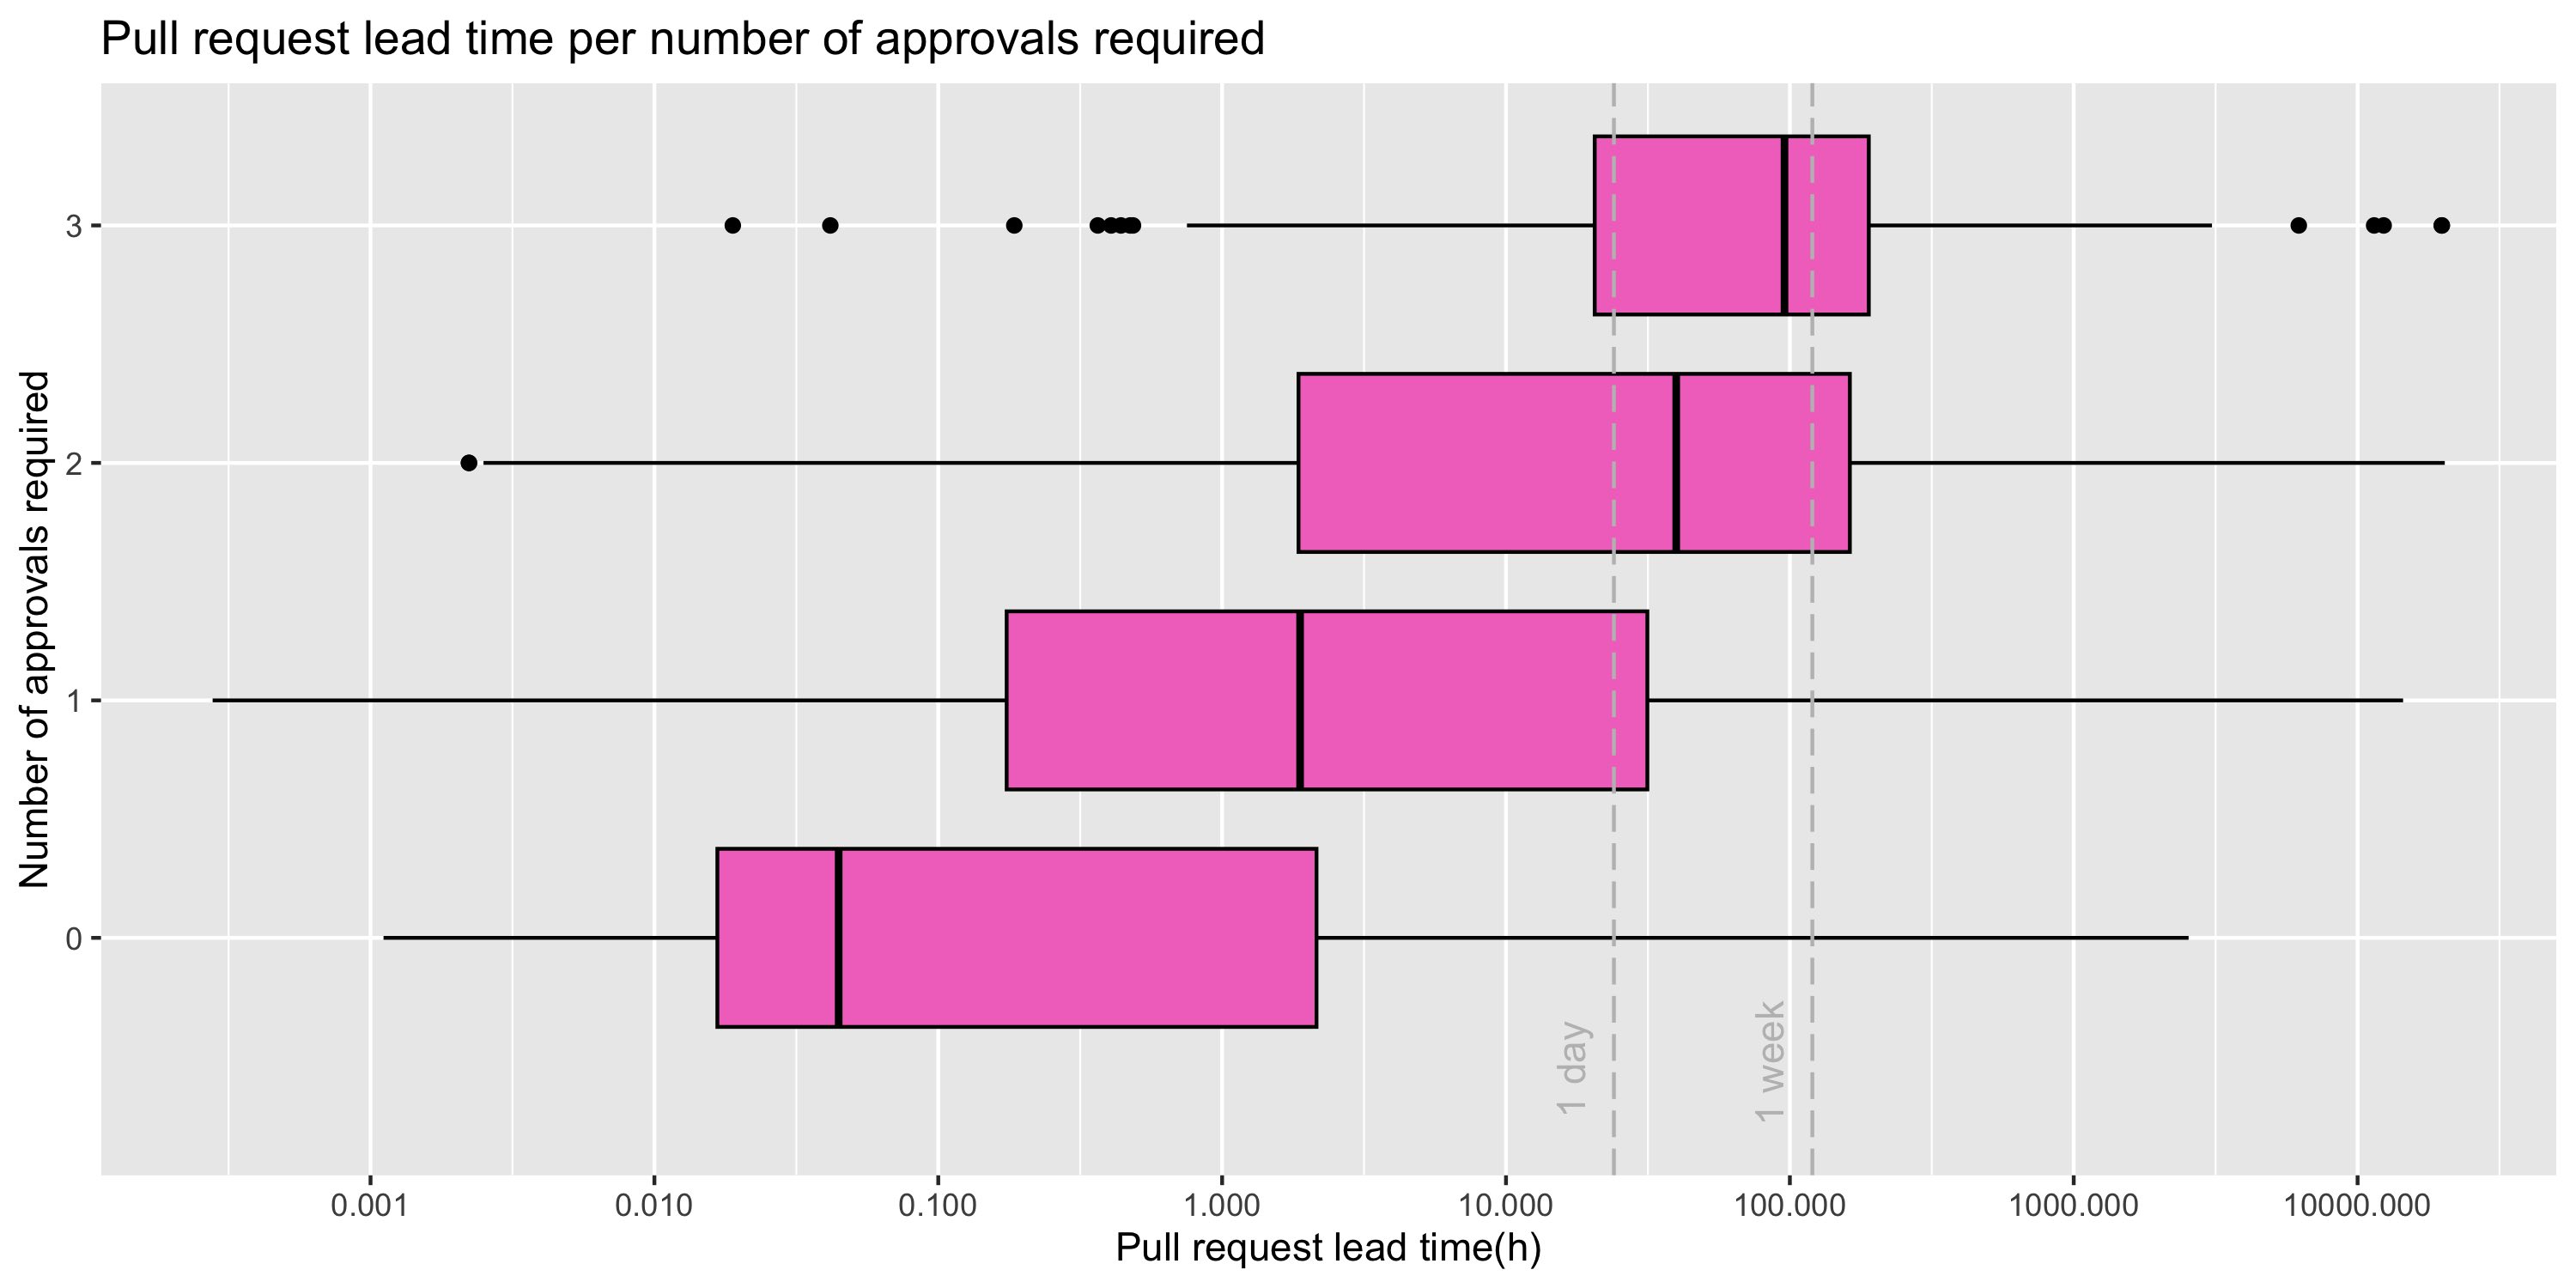 Pull request lead time per number of approvals required